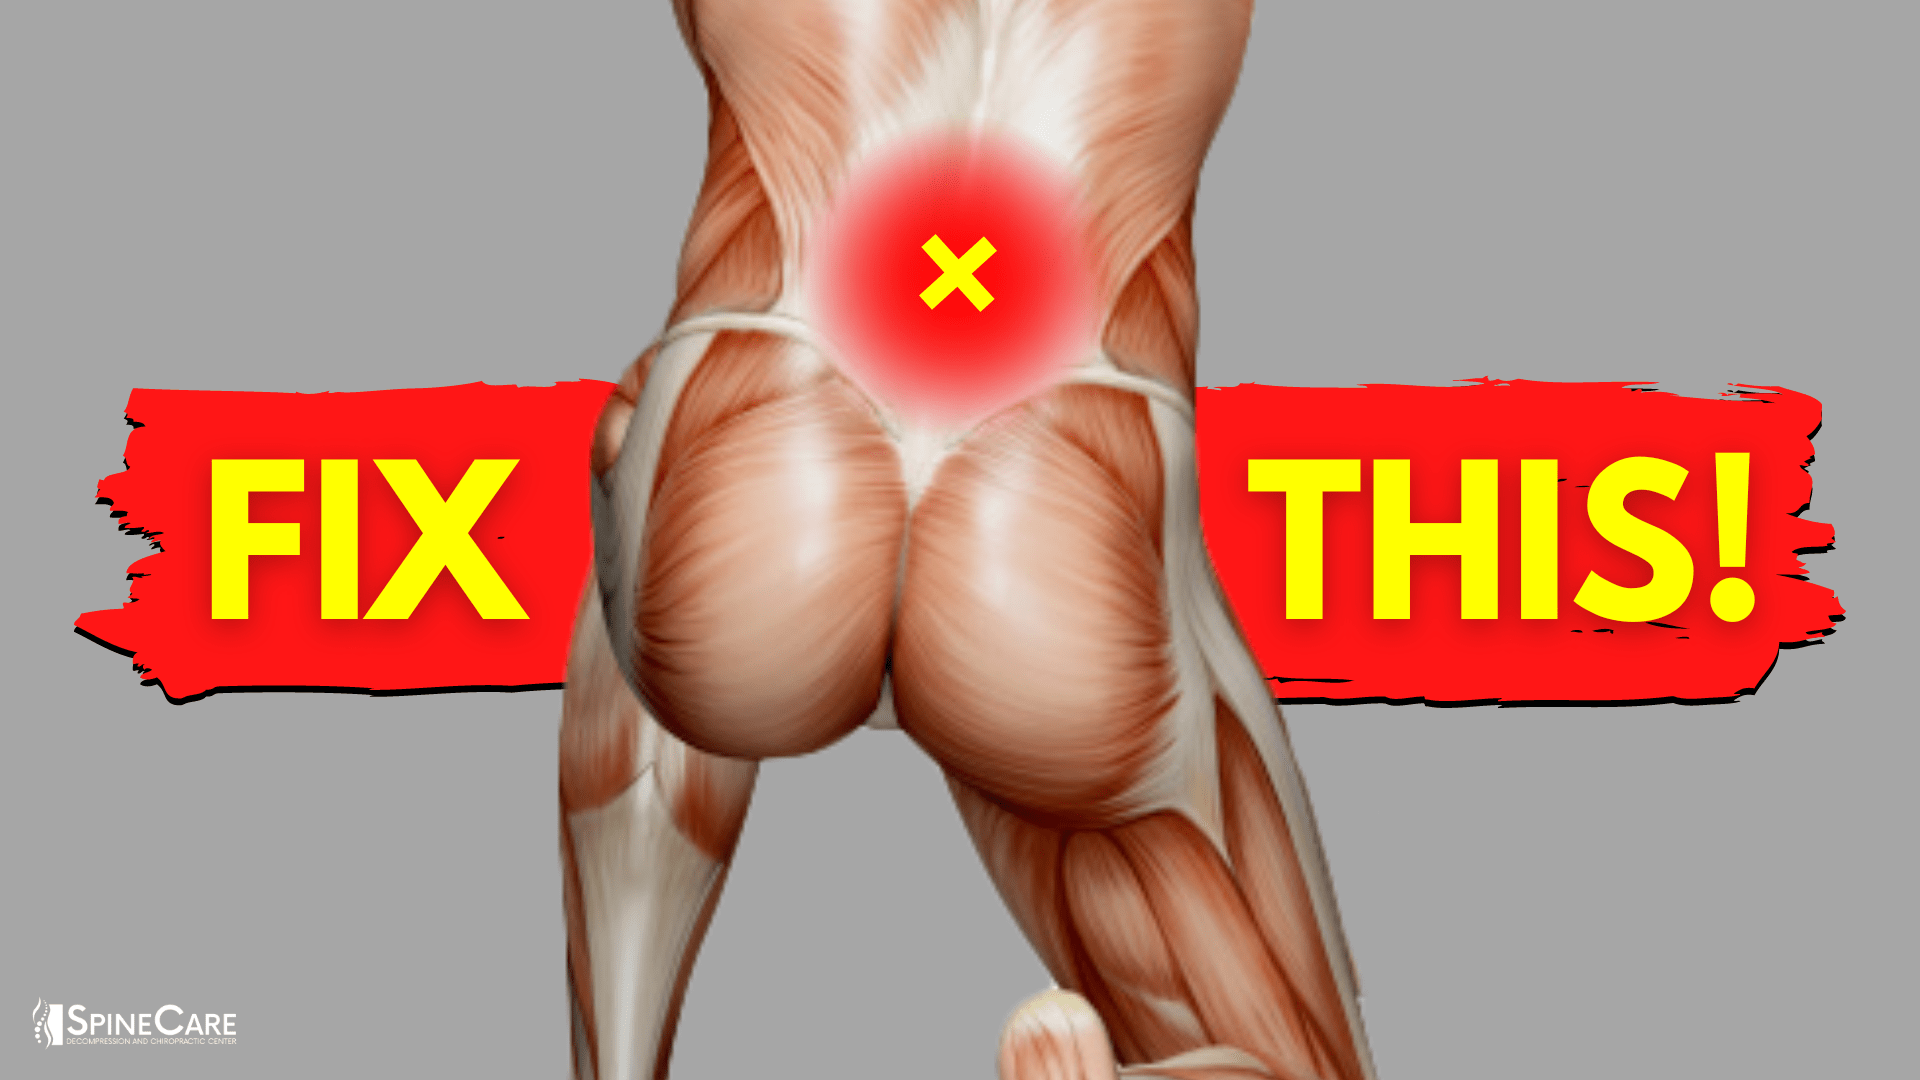 How to Fix Your Lower Back Pain | STEP-BY-STEP Guide | SpineCare | St. Joseph, Michigan Chiropractor